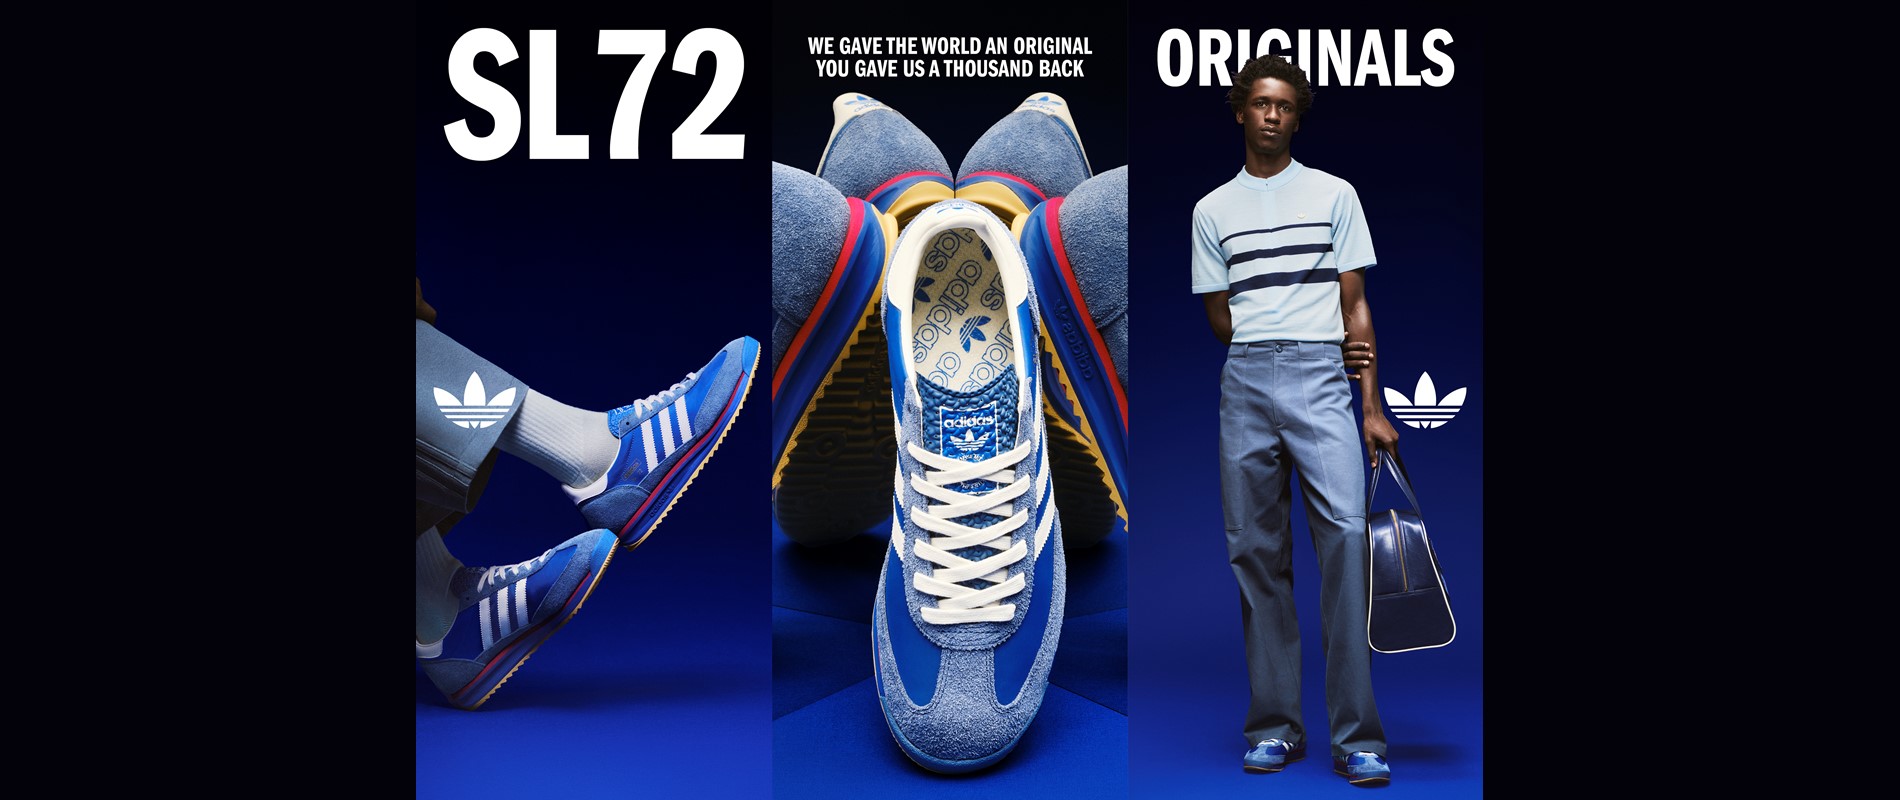 adidas Originals pays Homage to the Past Present and Future of the SL 72 Silhouette with a New Global Campaign